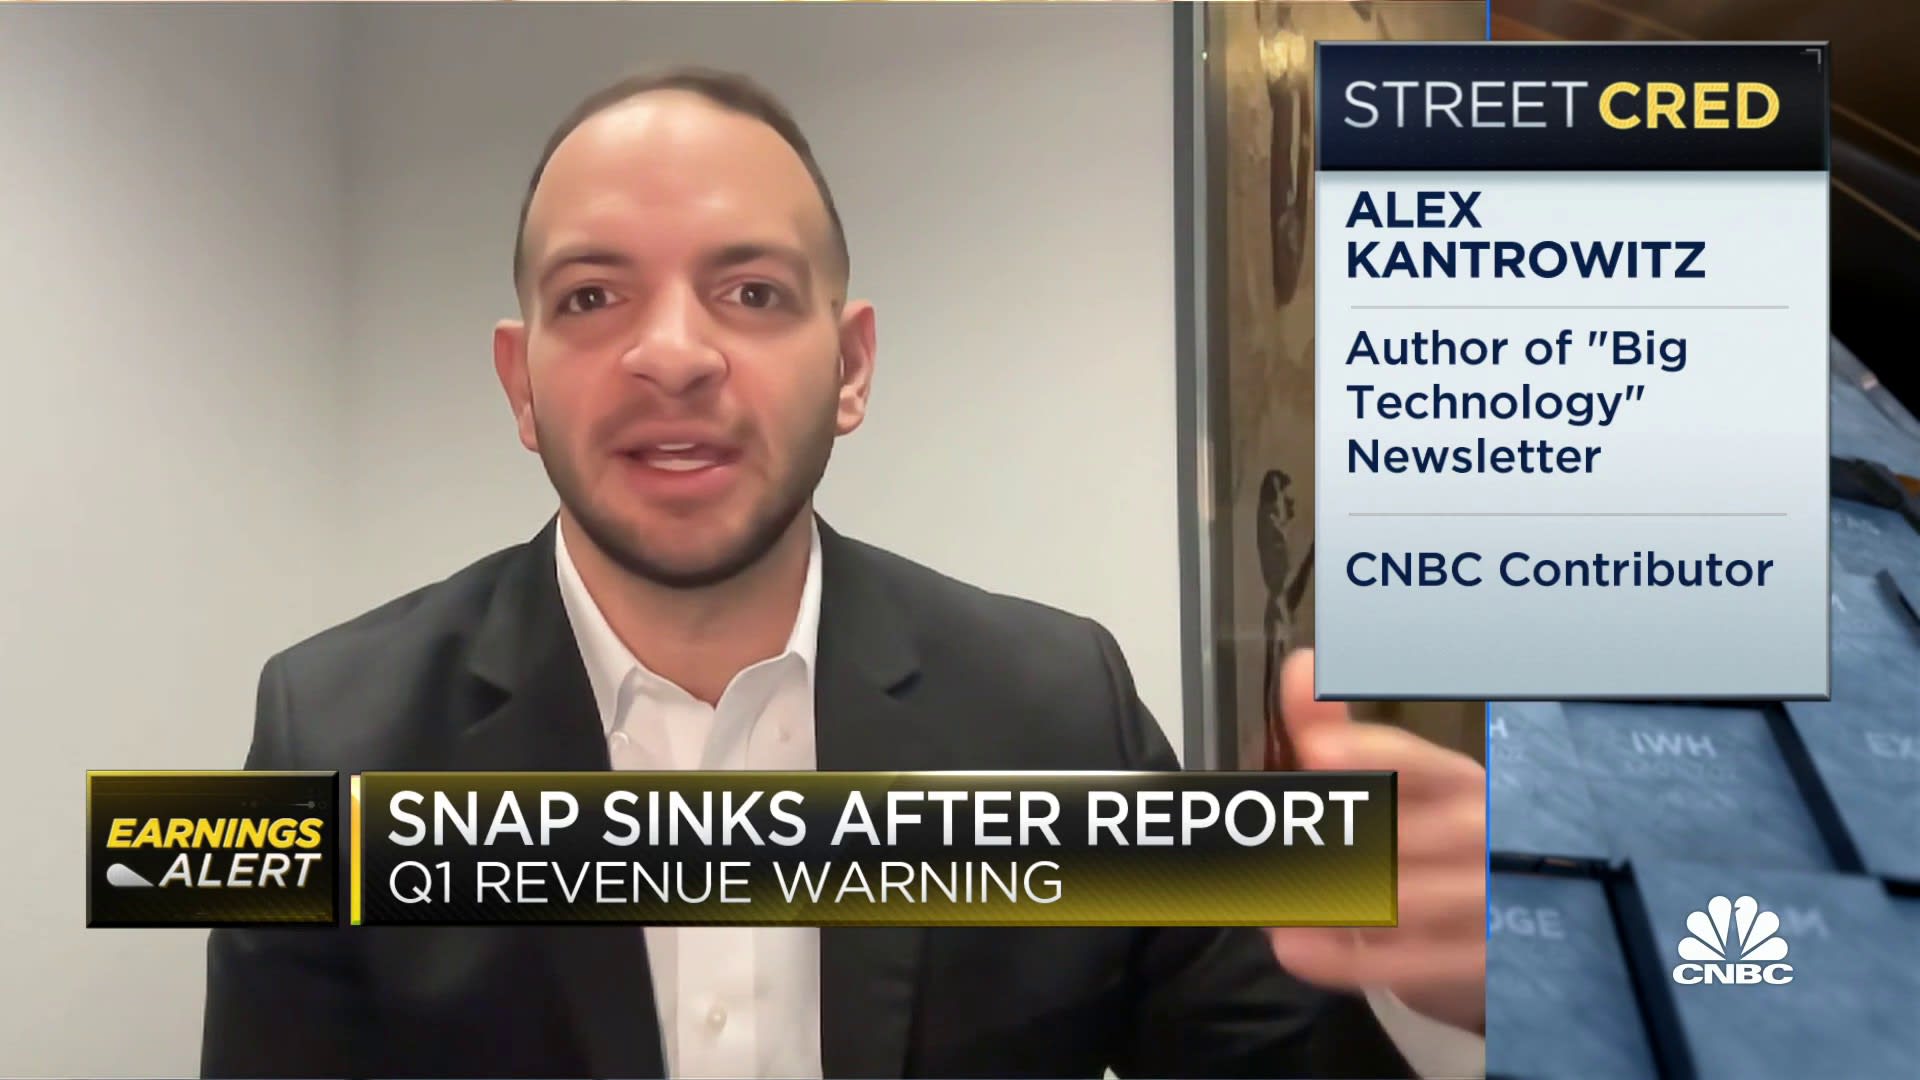 Big Technology's Alex Kantrowitz says he'd be 'shocked' if Meta's earnings mirrored SNAP